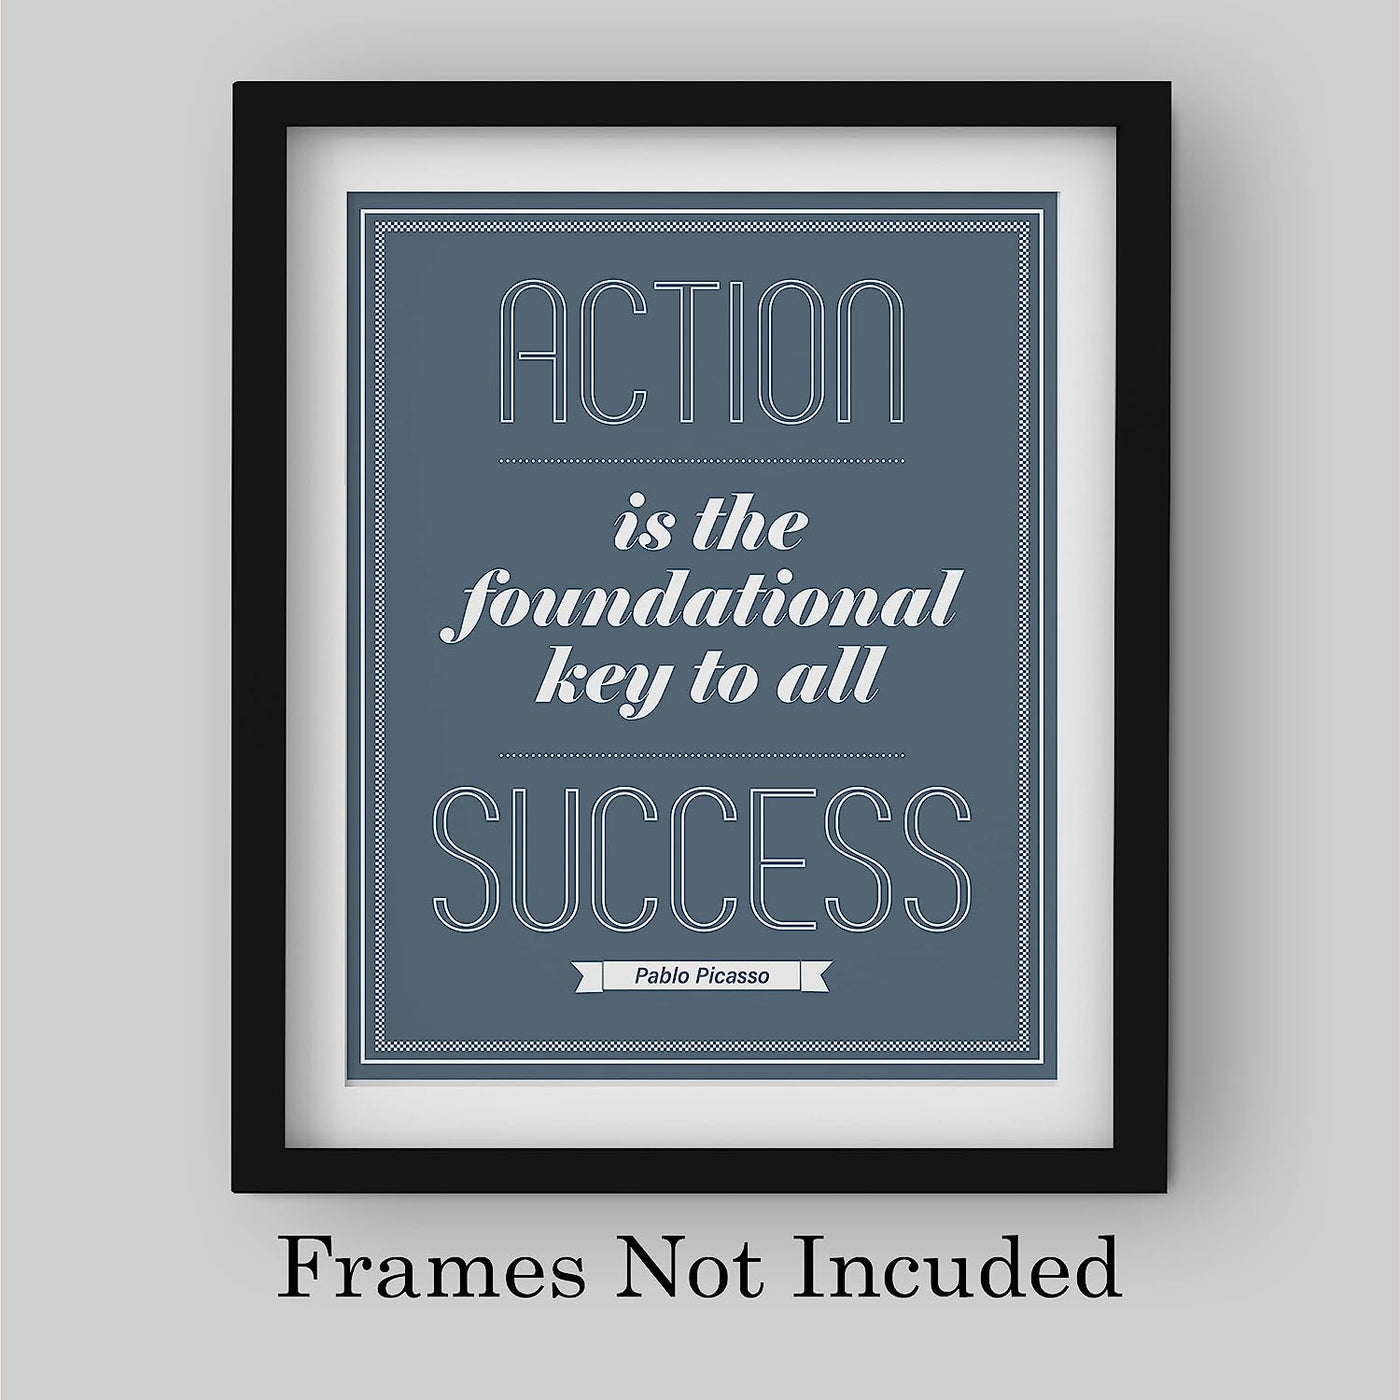 Pablo Picasso Quotes-"Action Is the Foundational Key to All Success" Motivational Wall Art-8 x 10" Modern Typographic Print-Ready to Frame. Inspirational Decor for Home-Office-Work-Gym-School Decor!